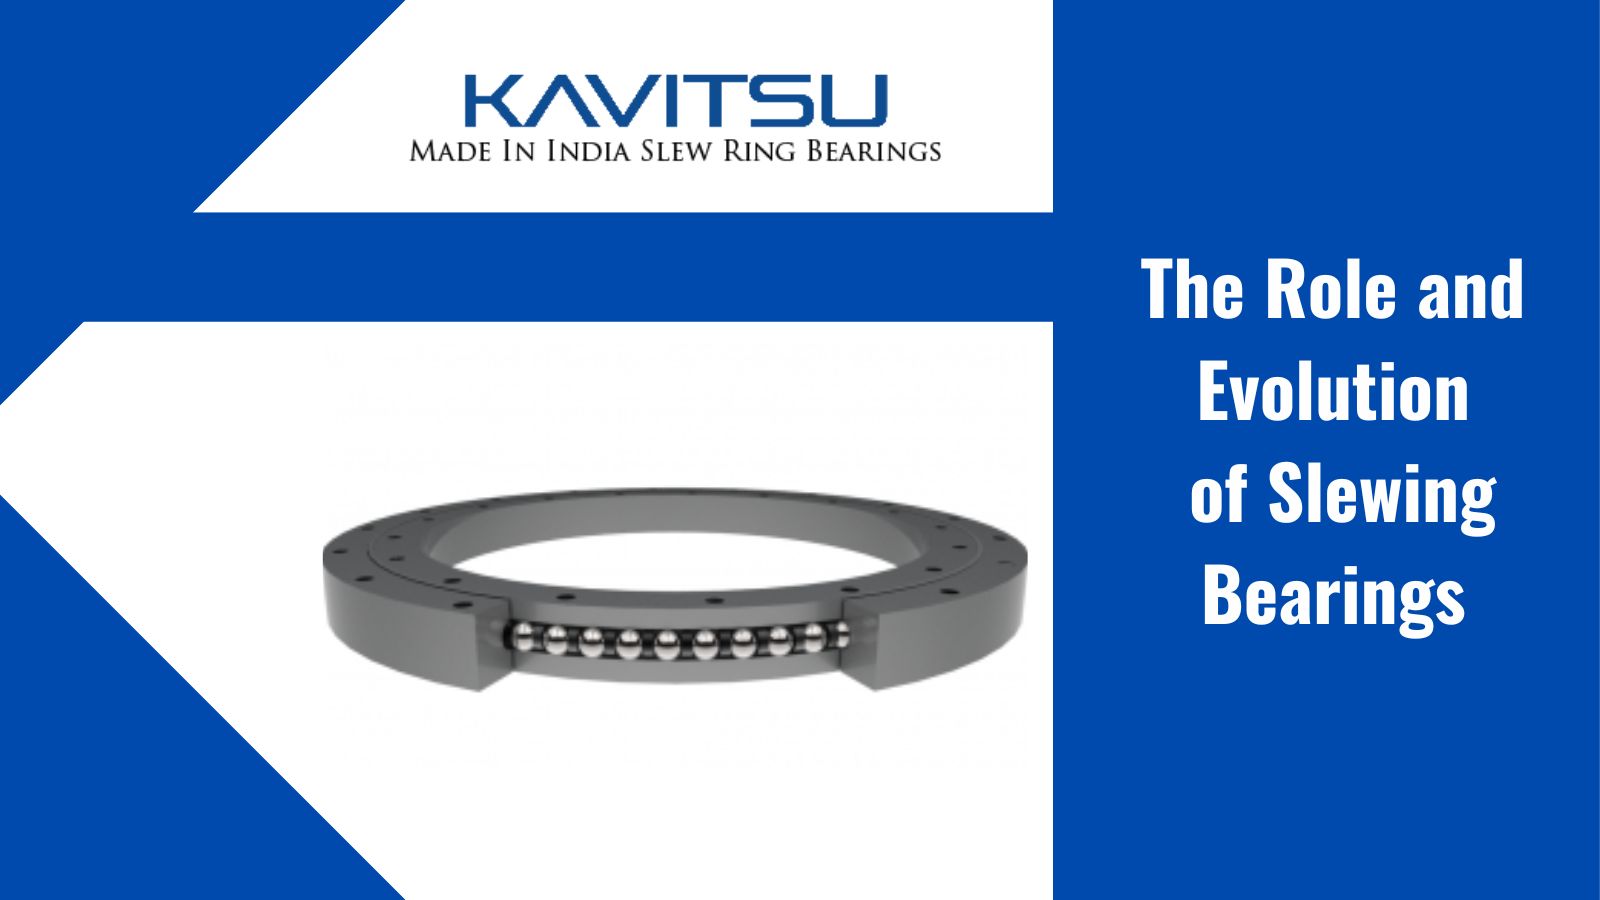 The Role and Evolution of Slewing Bearings